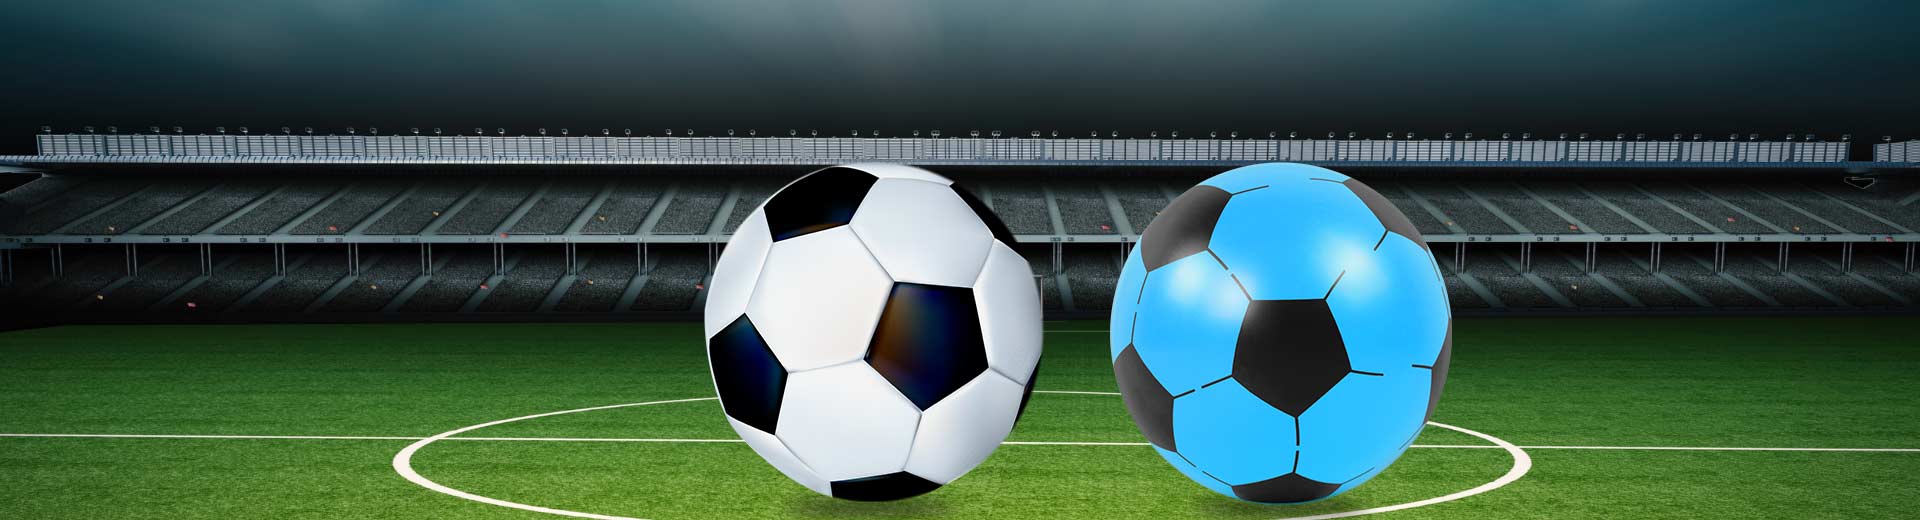 Match Ball Manufacturers in Surrey